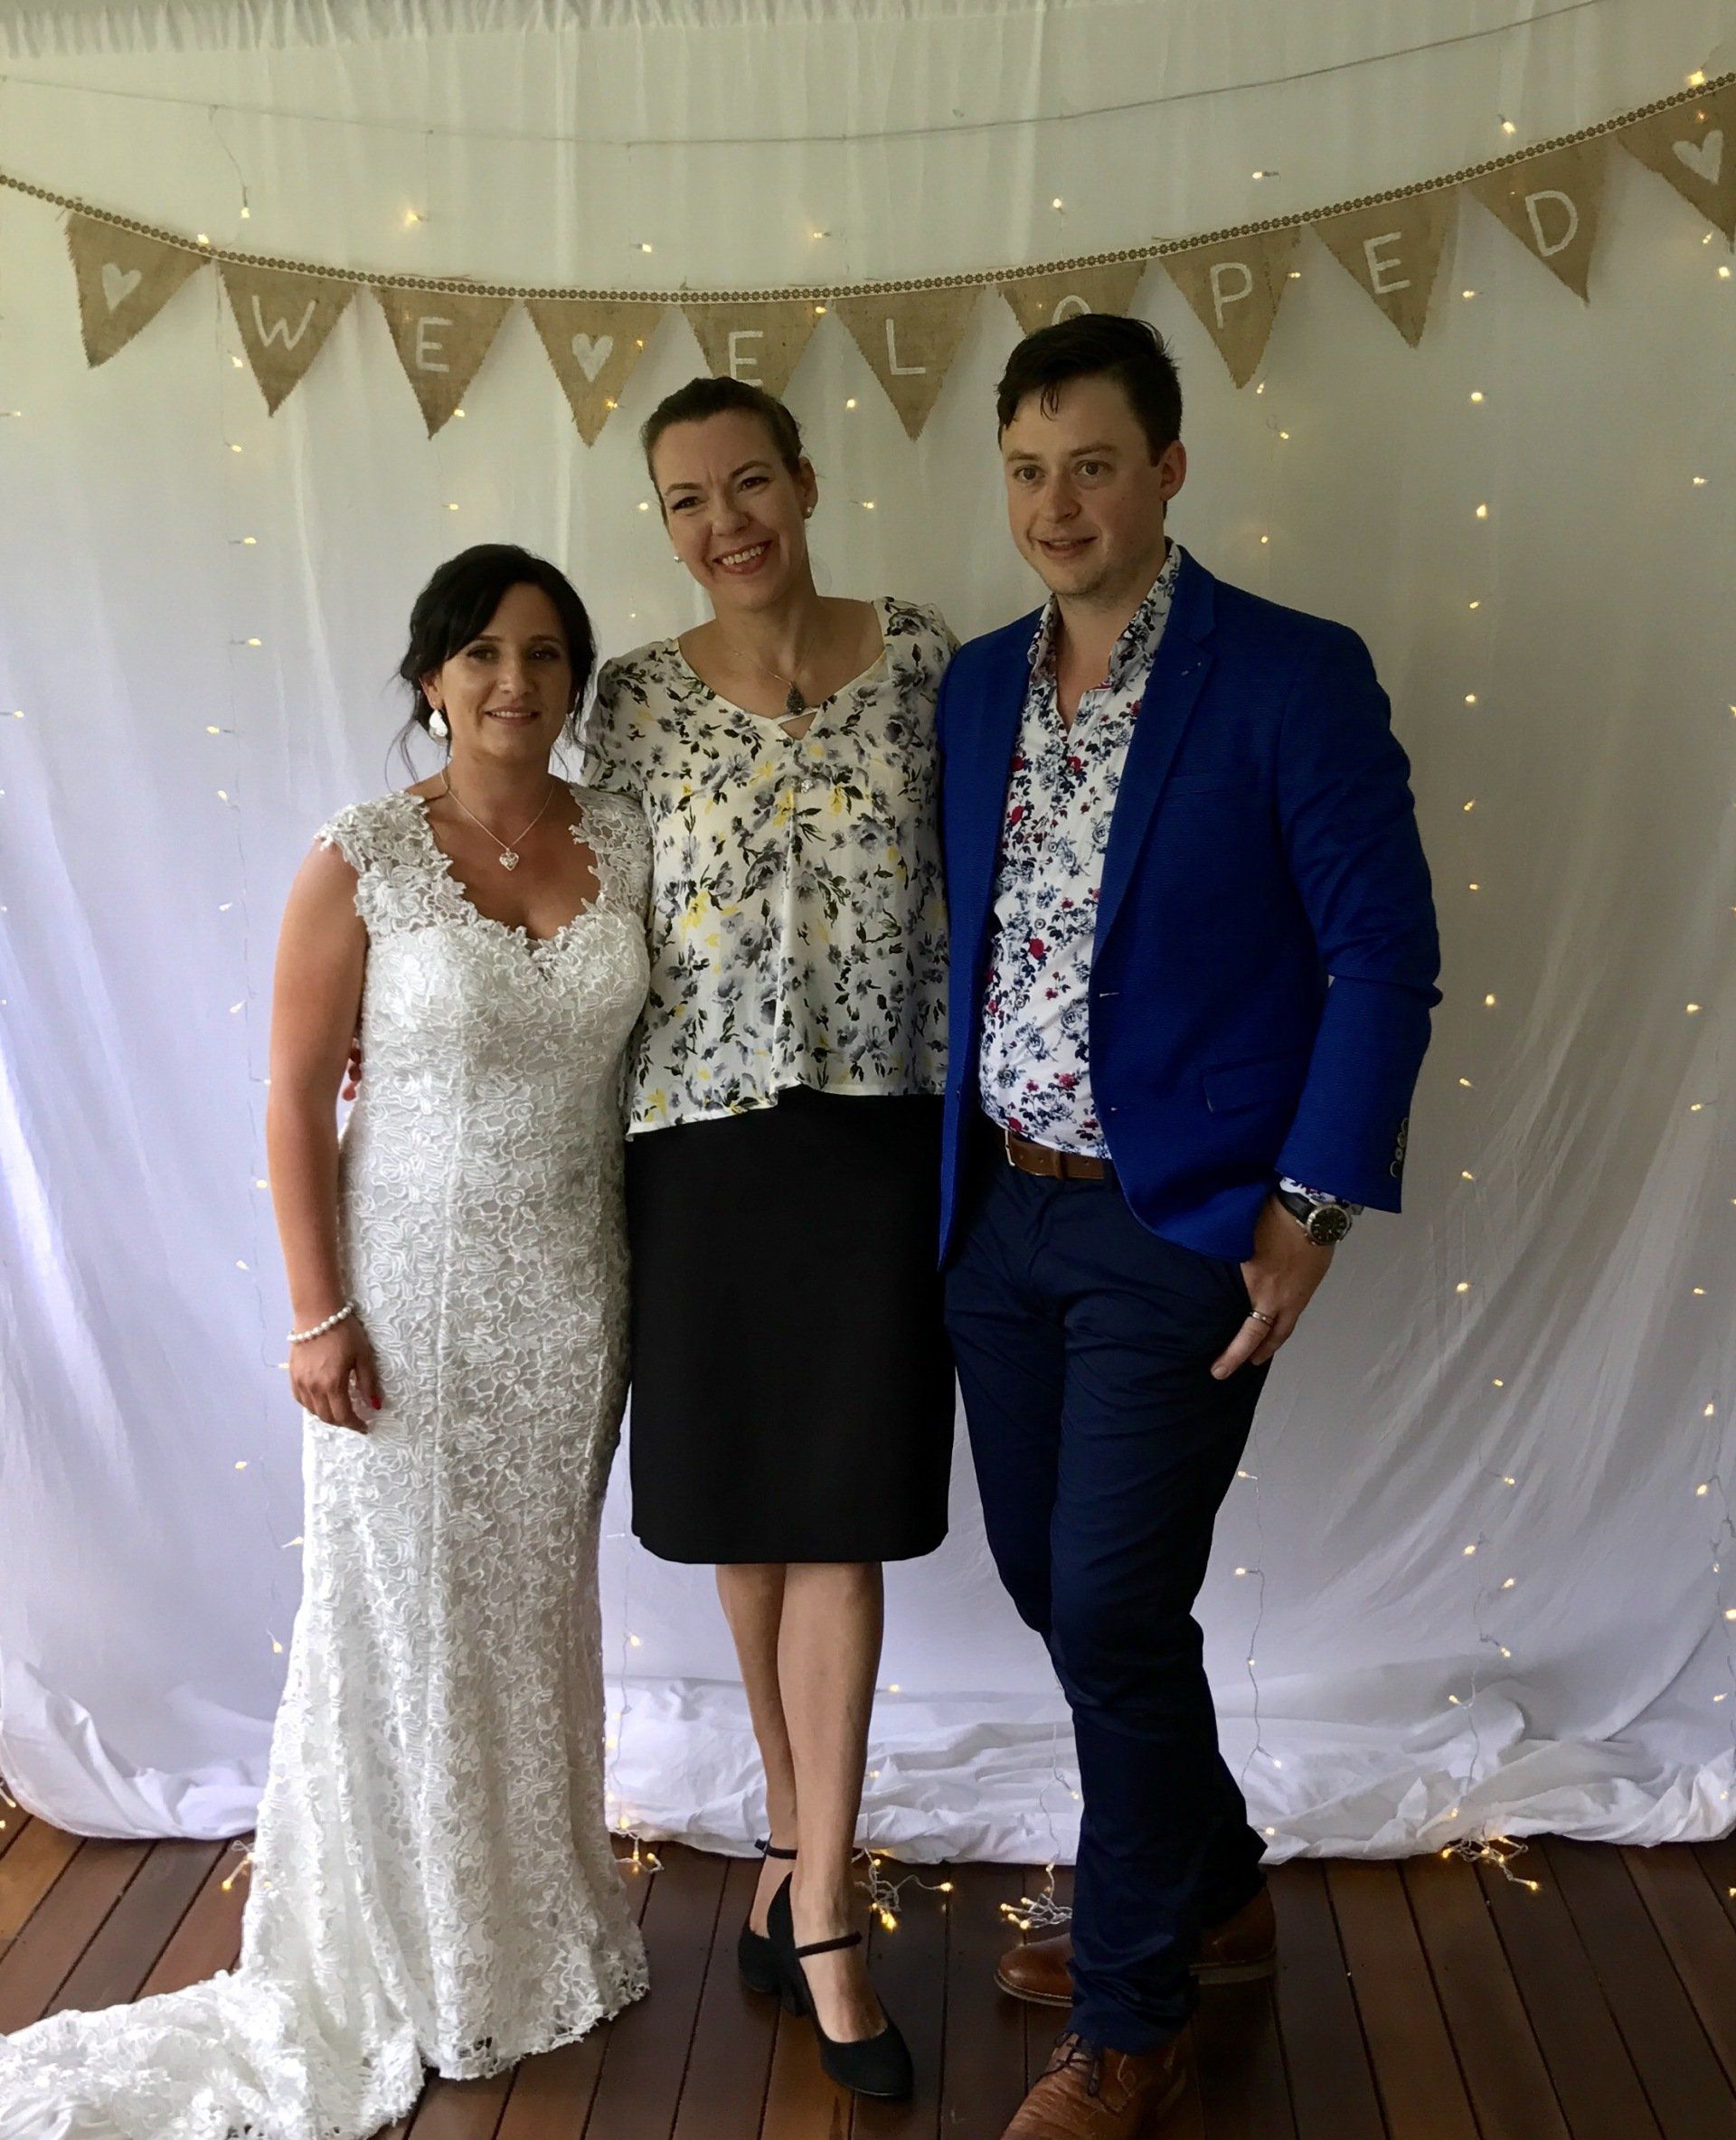 bridal couple elopement stand with celebrant under 'we eloped' sign and curtain with fairy lights at house